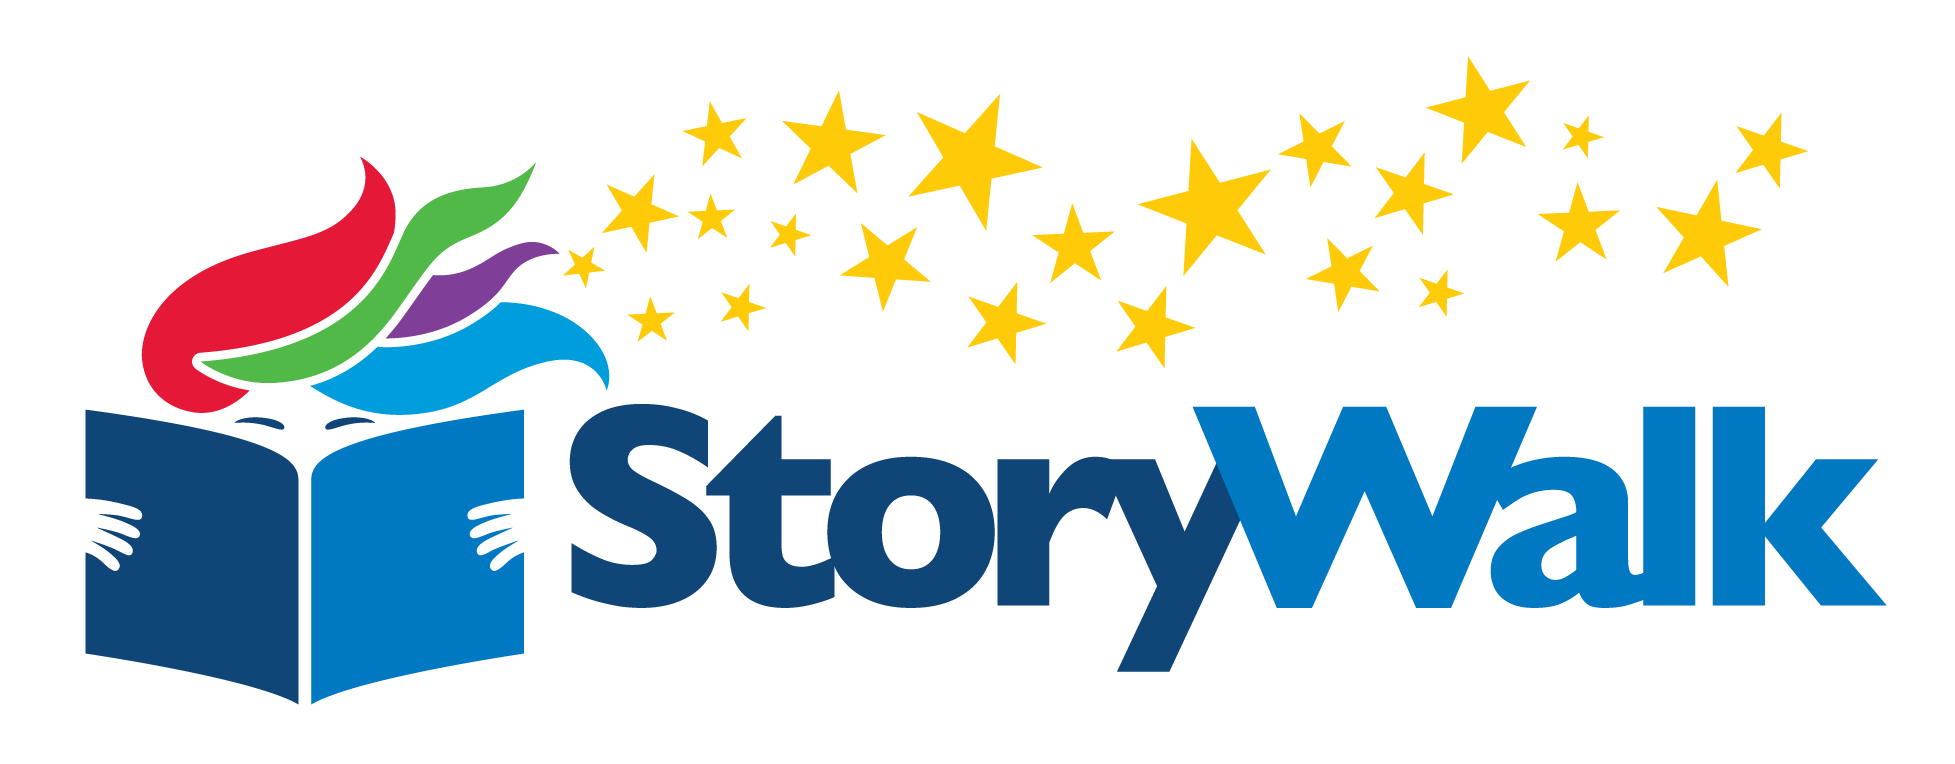 peoria public library story walk logo - graphic with words